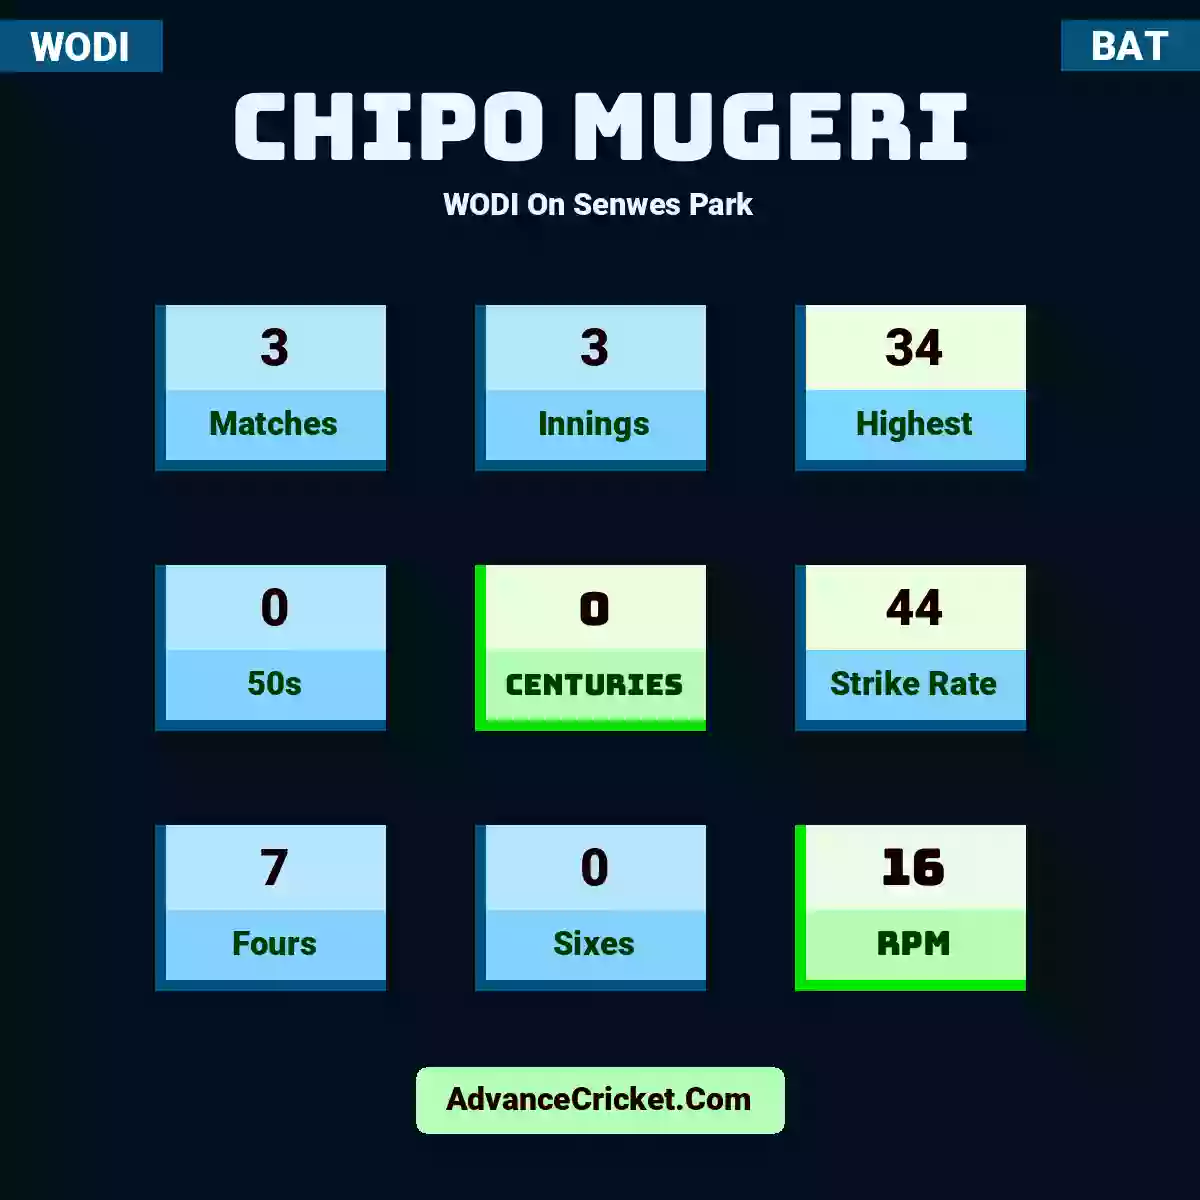 Chipo Mugeri WODI  On Senwes Park, Chipo Mugeri played 3 matches, scored 34 runs as highest, 0 half-centuries, and 0 centuries, with a strike rate of 44. C.Mugeri hit 7 fours and 0 sixes, with an RPM of 16.